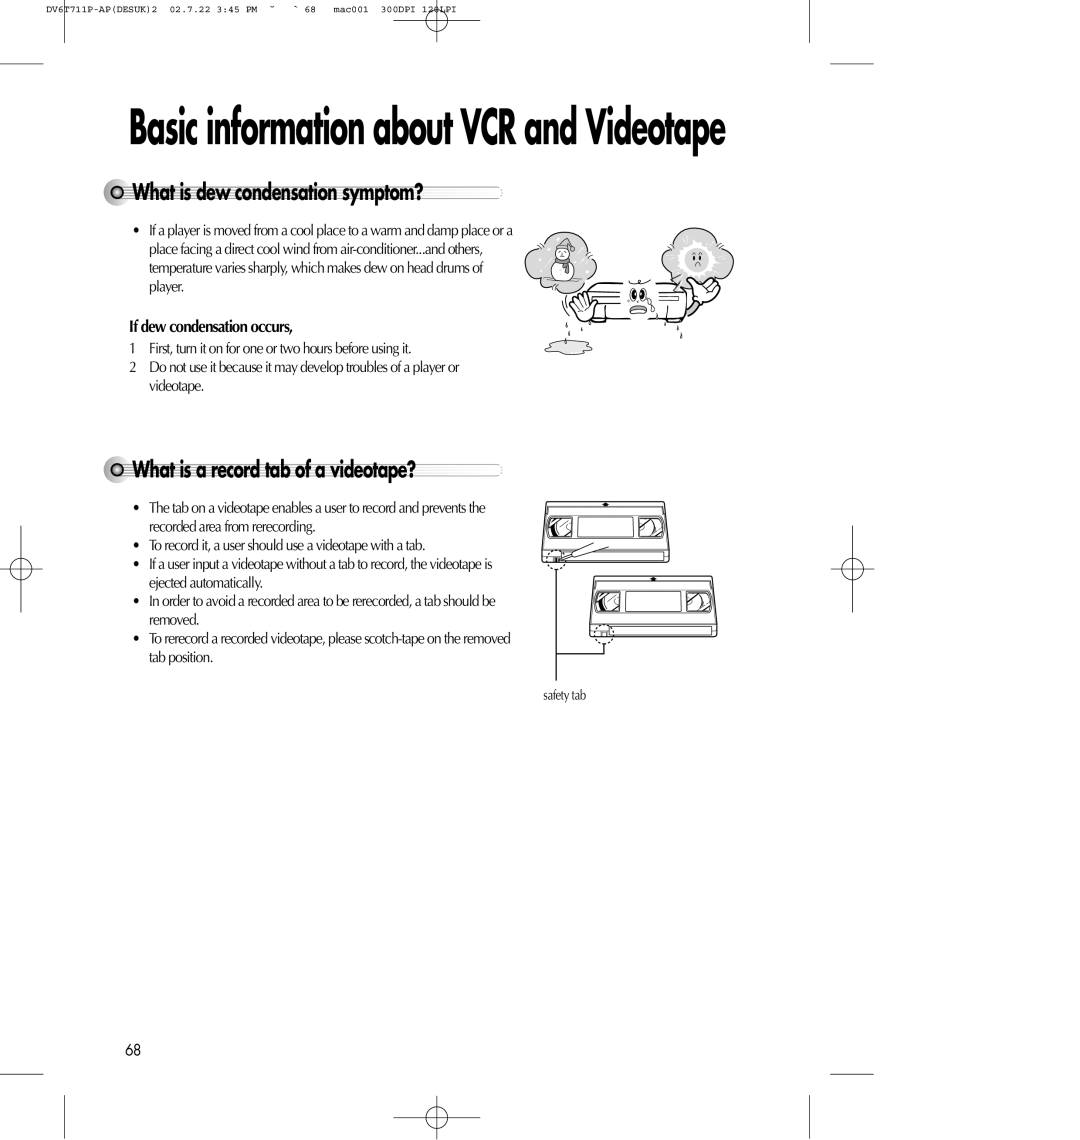 Daewoo SD-2100P Basic information about VCR and Videotape, Whatisdewcondensationsymptom?, Whatisarecordtabofavideotape? 